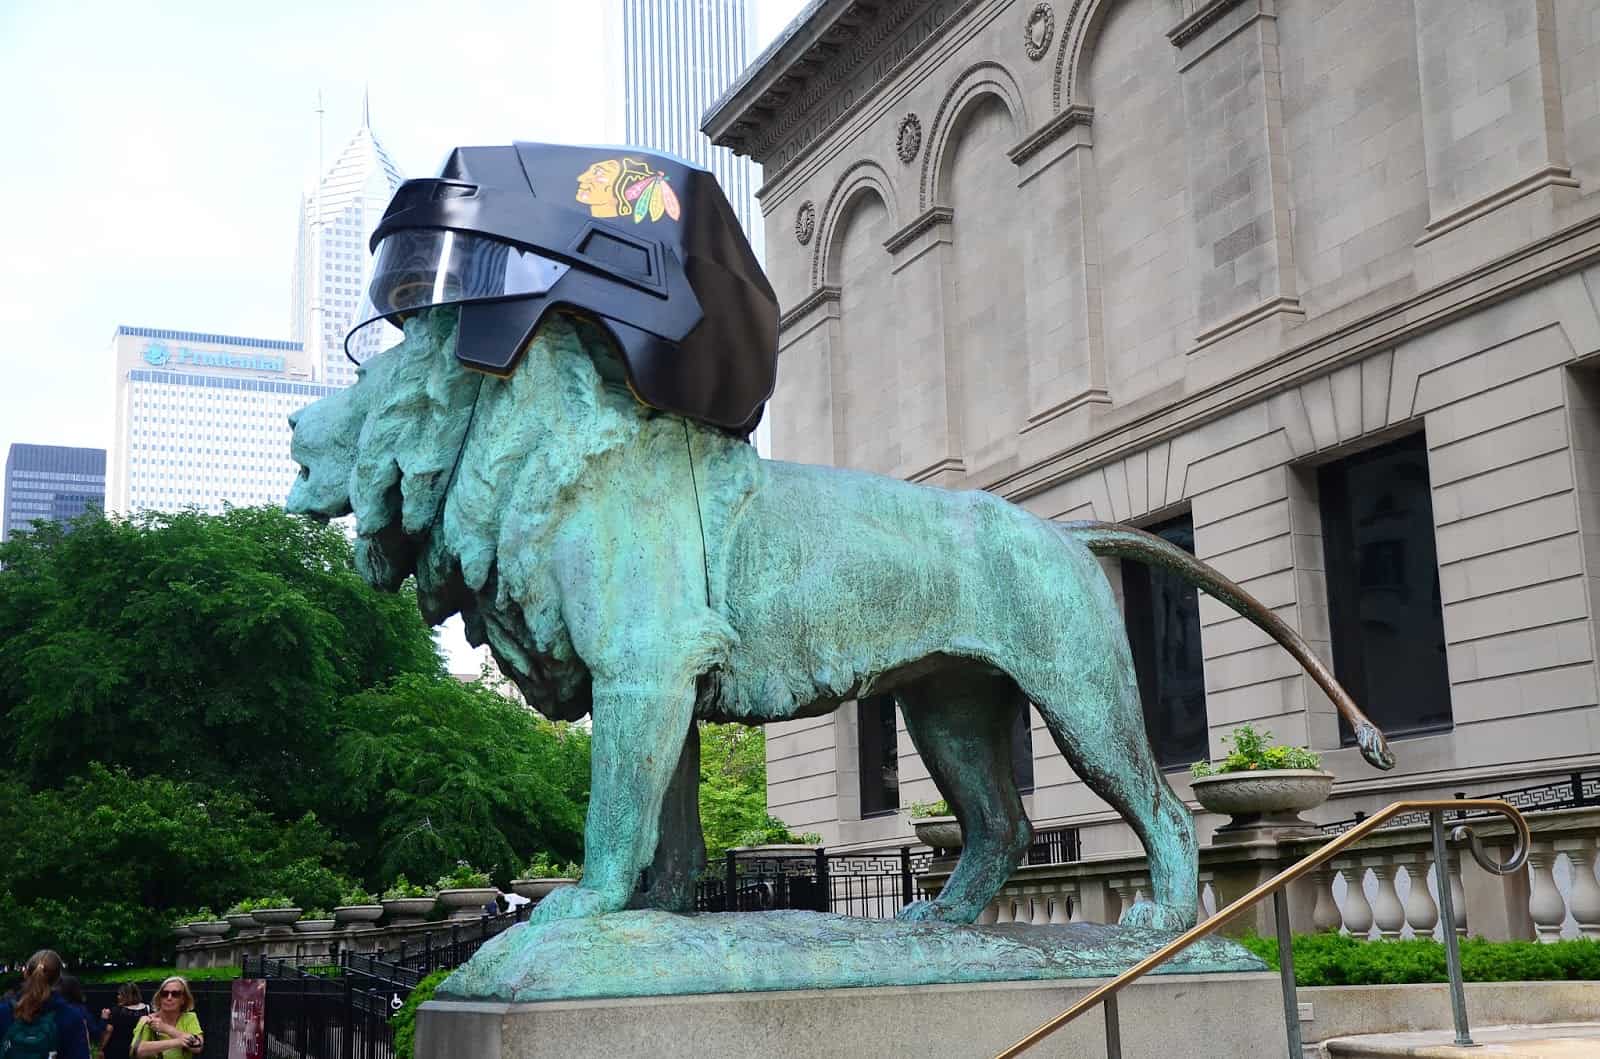 Lion dressed up for the Stanley Cup Finals at the Art Institute of Chicago